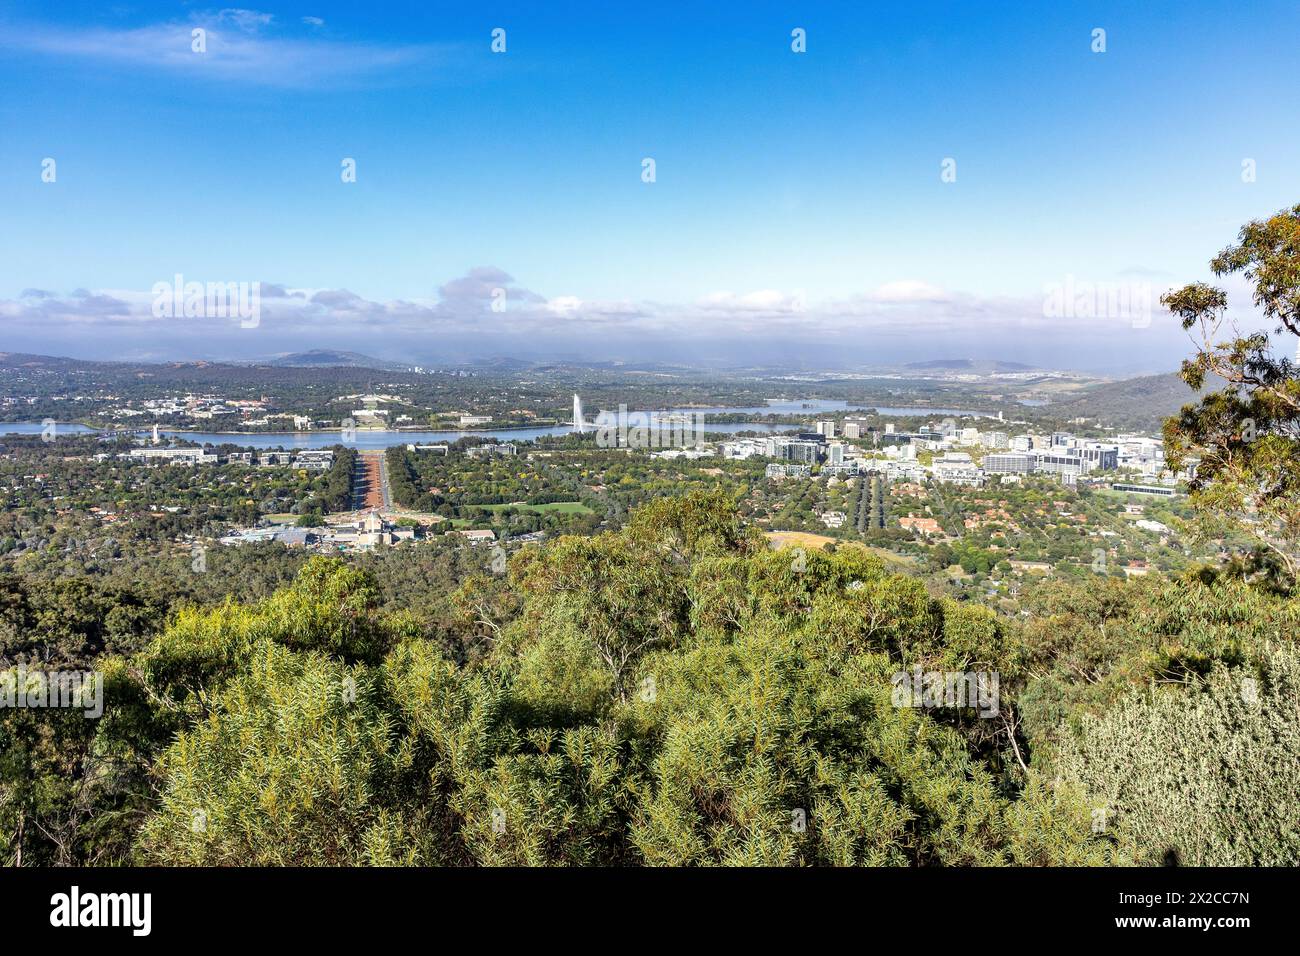 City view from Mount Ainslie Lookout, Mount Ainslie Nature Reserve., Canberra, Australian Capital Territory, Australia Stock Photo